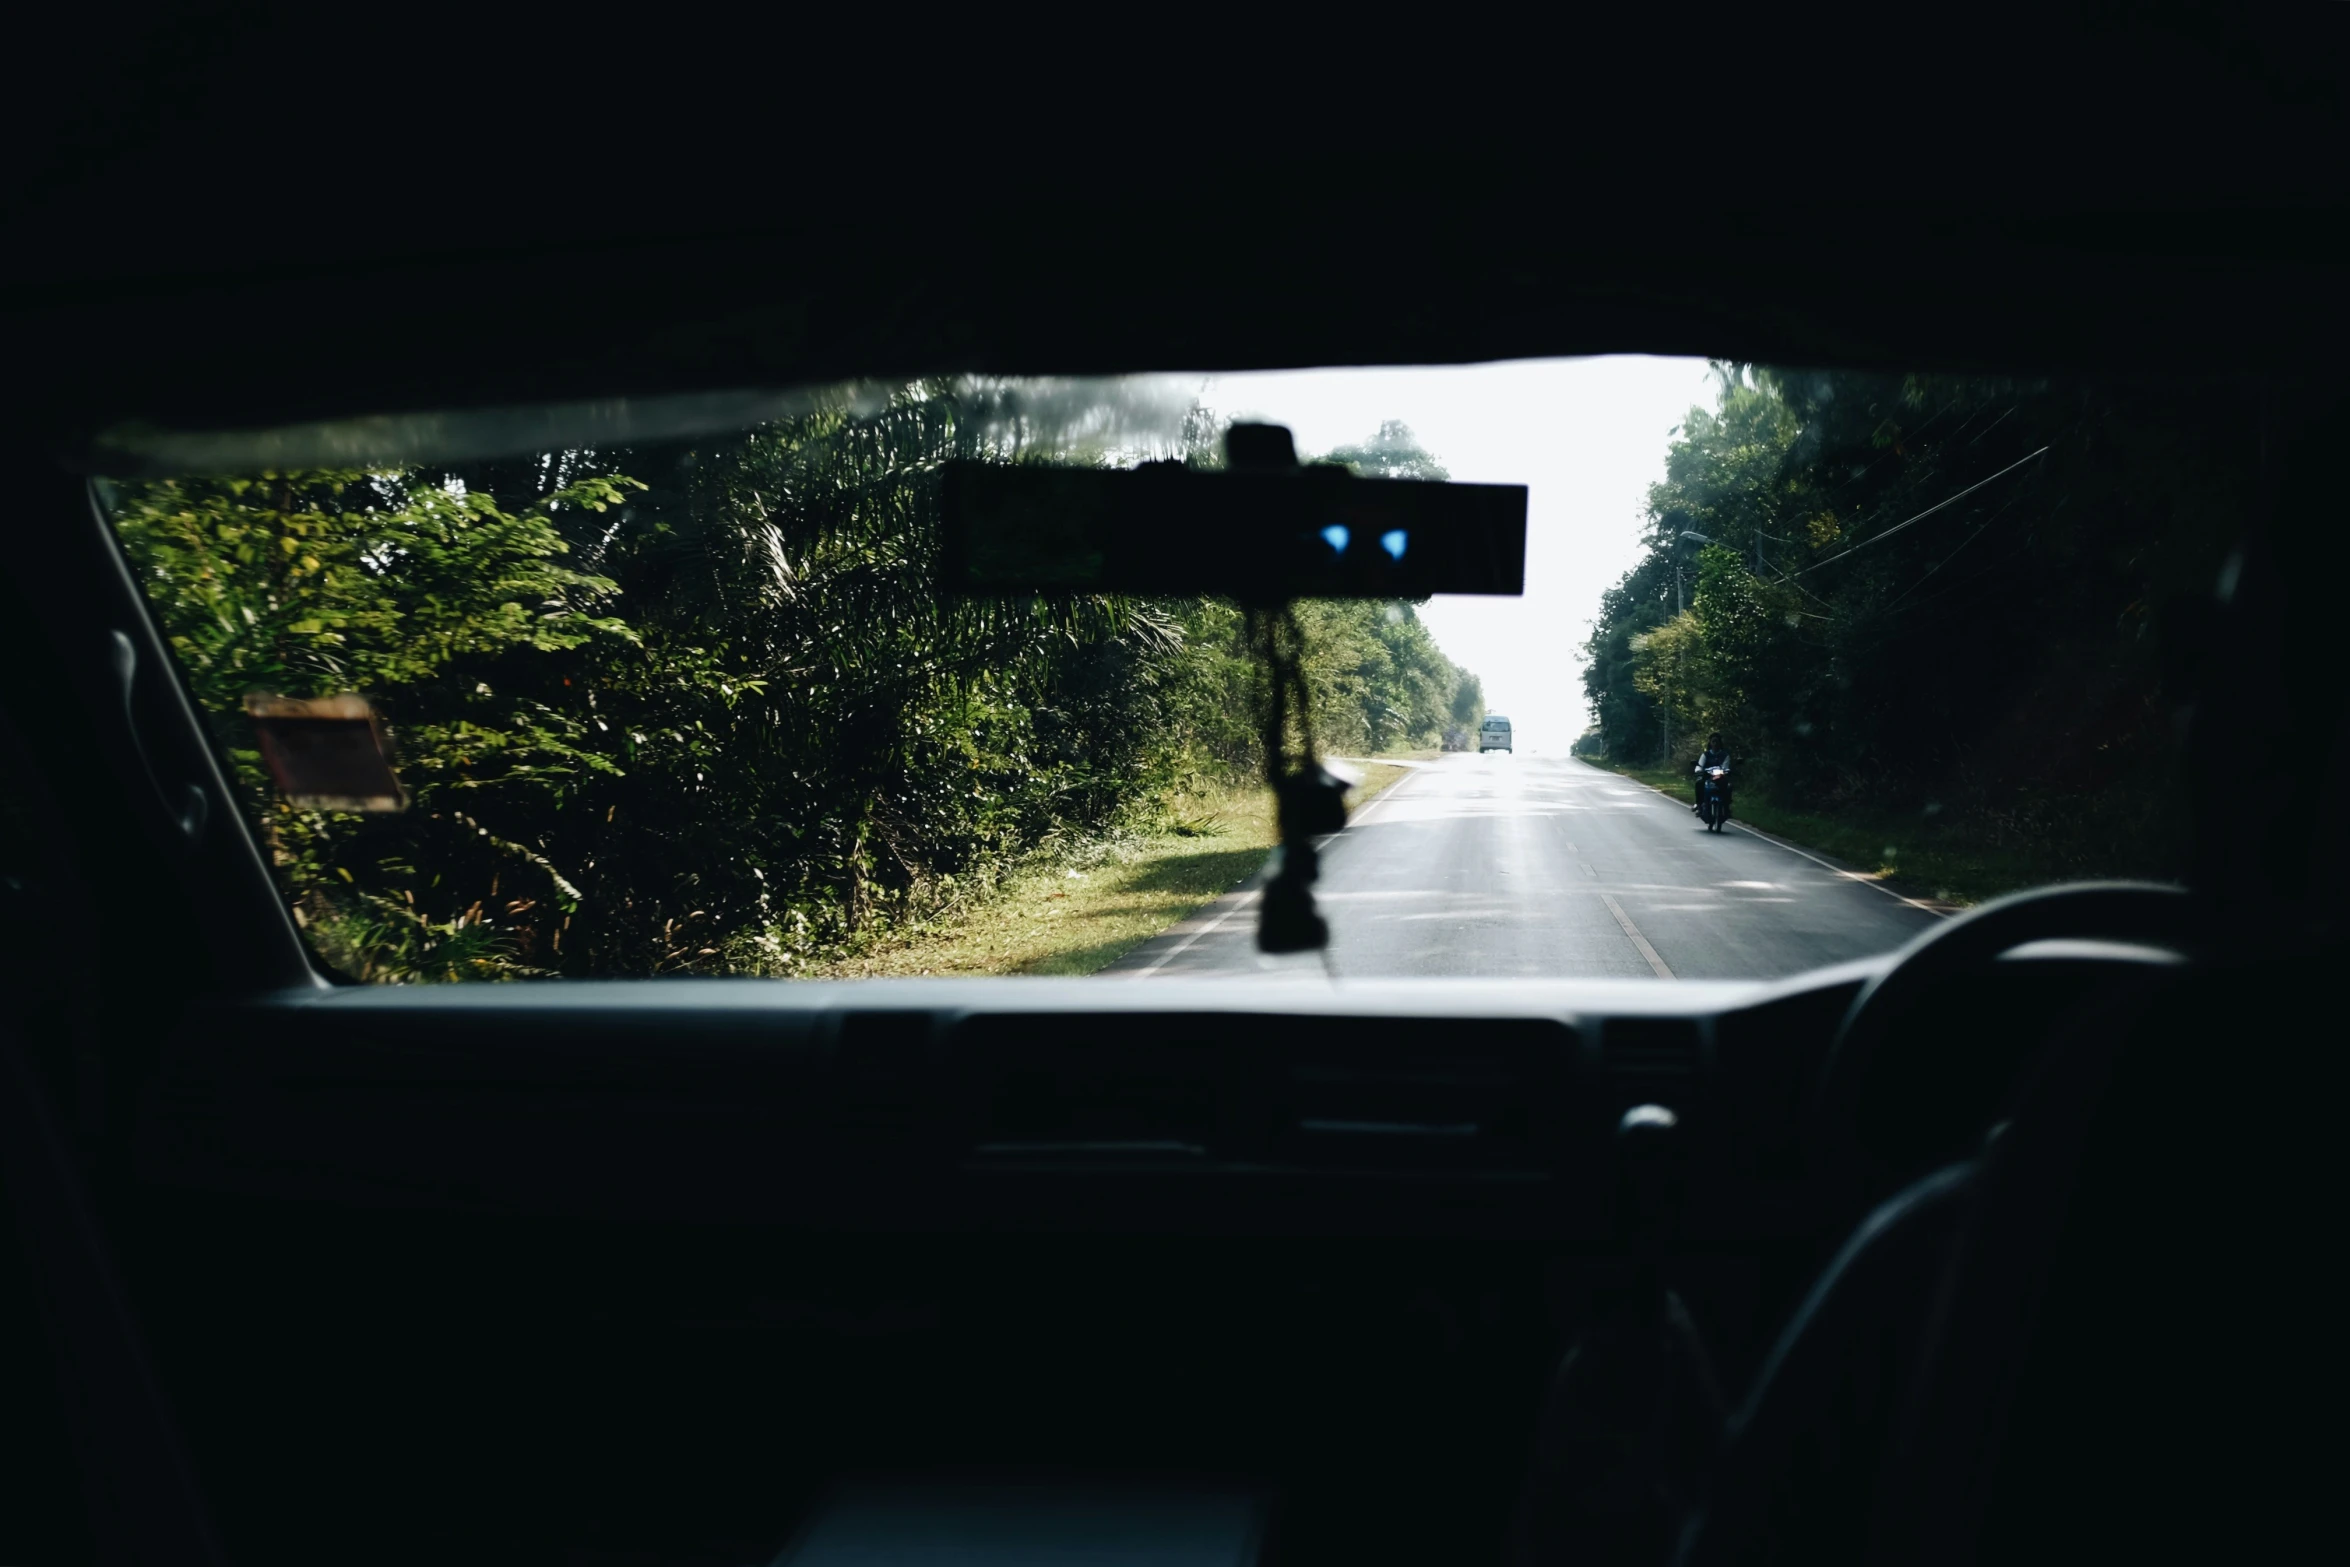 the view from inside the car shows an approaching camera